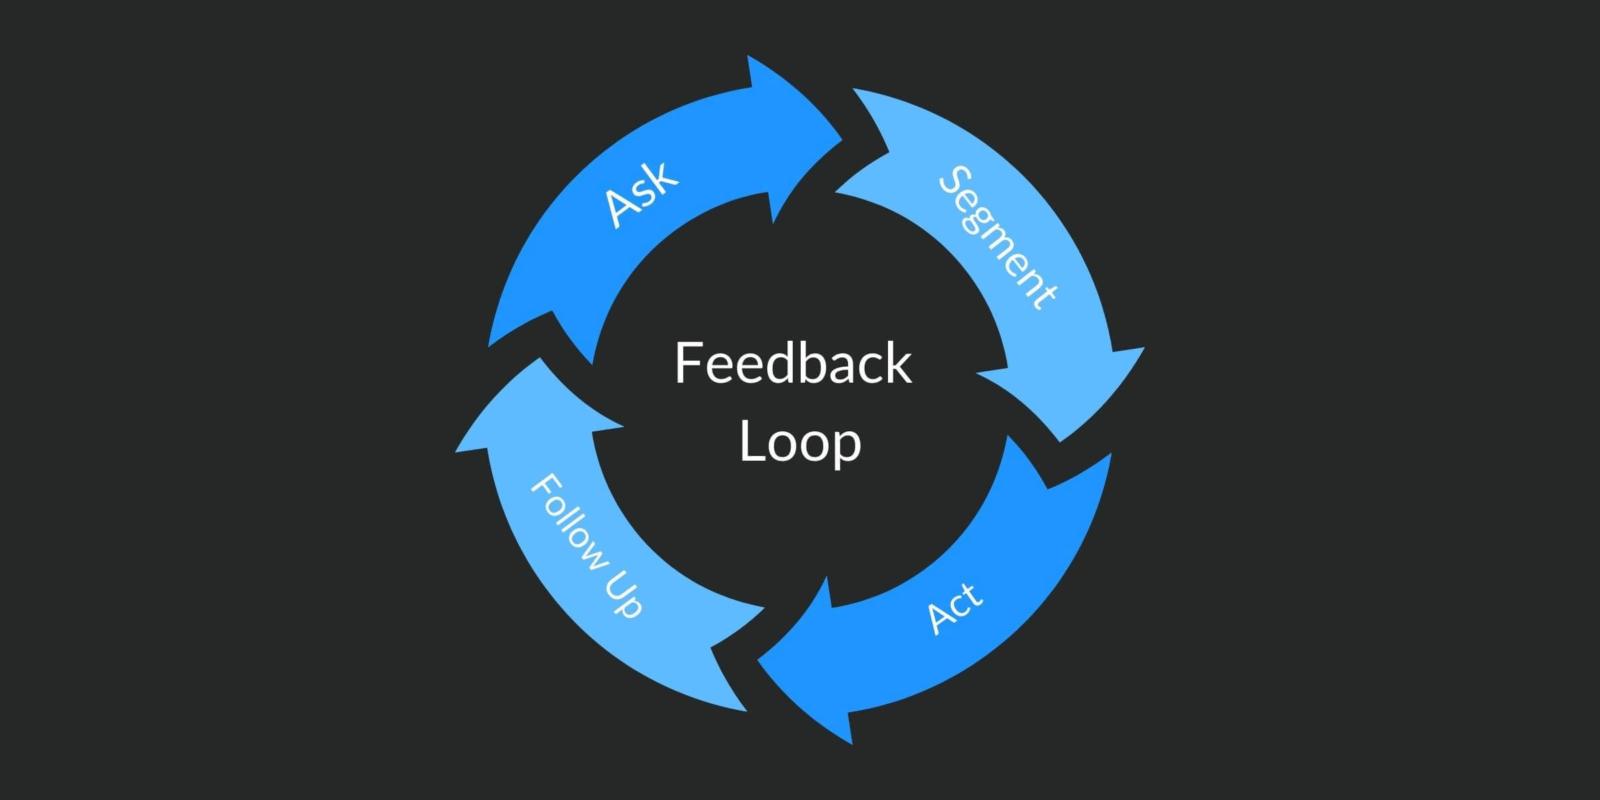 Illustration of a feedback loop: ask, segment, act, follow up